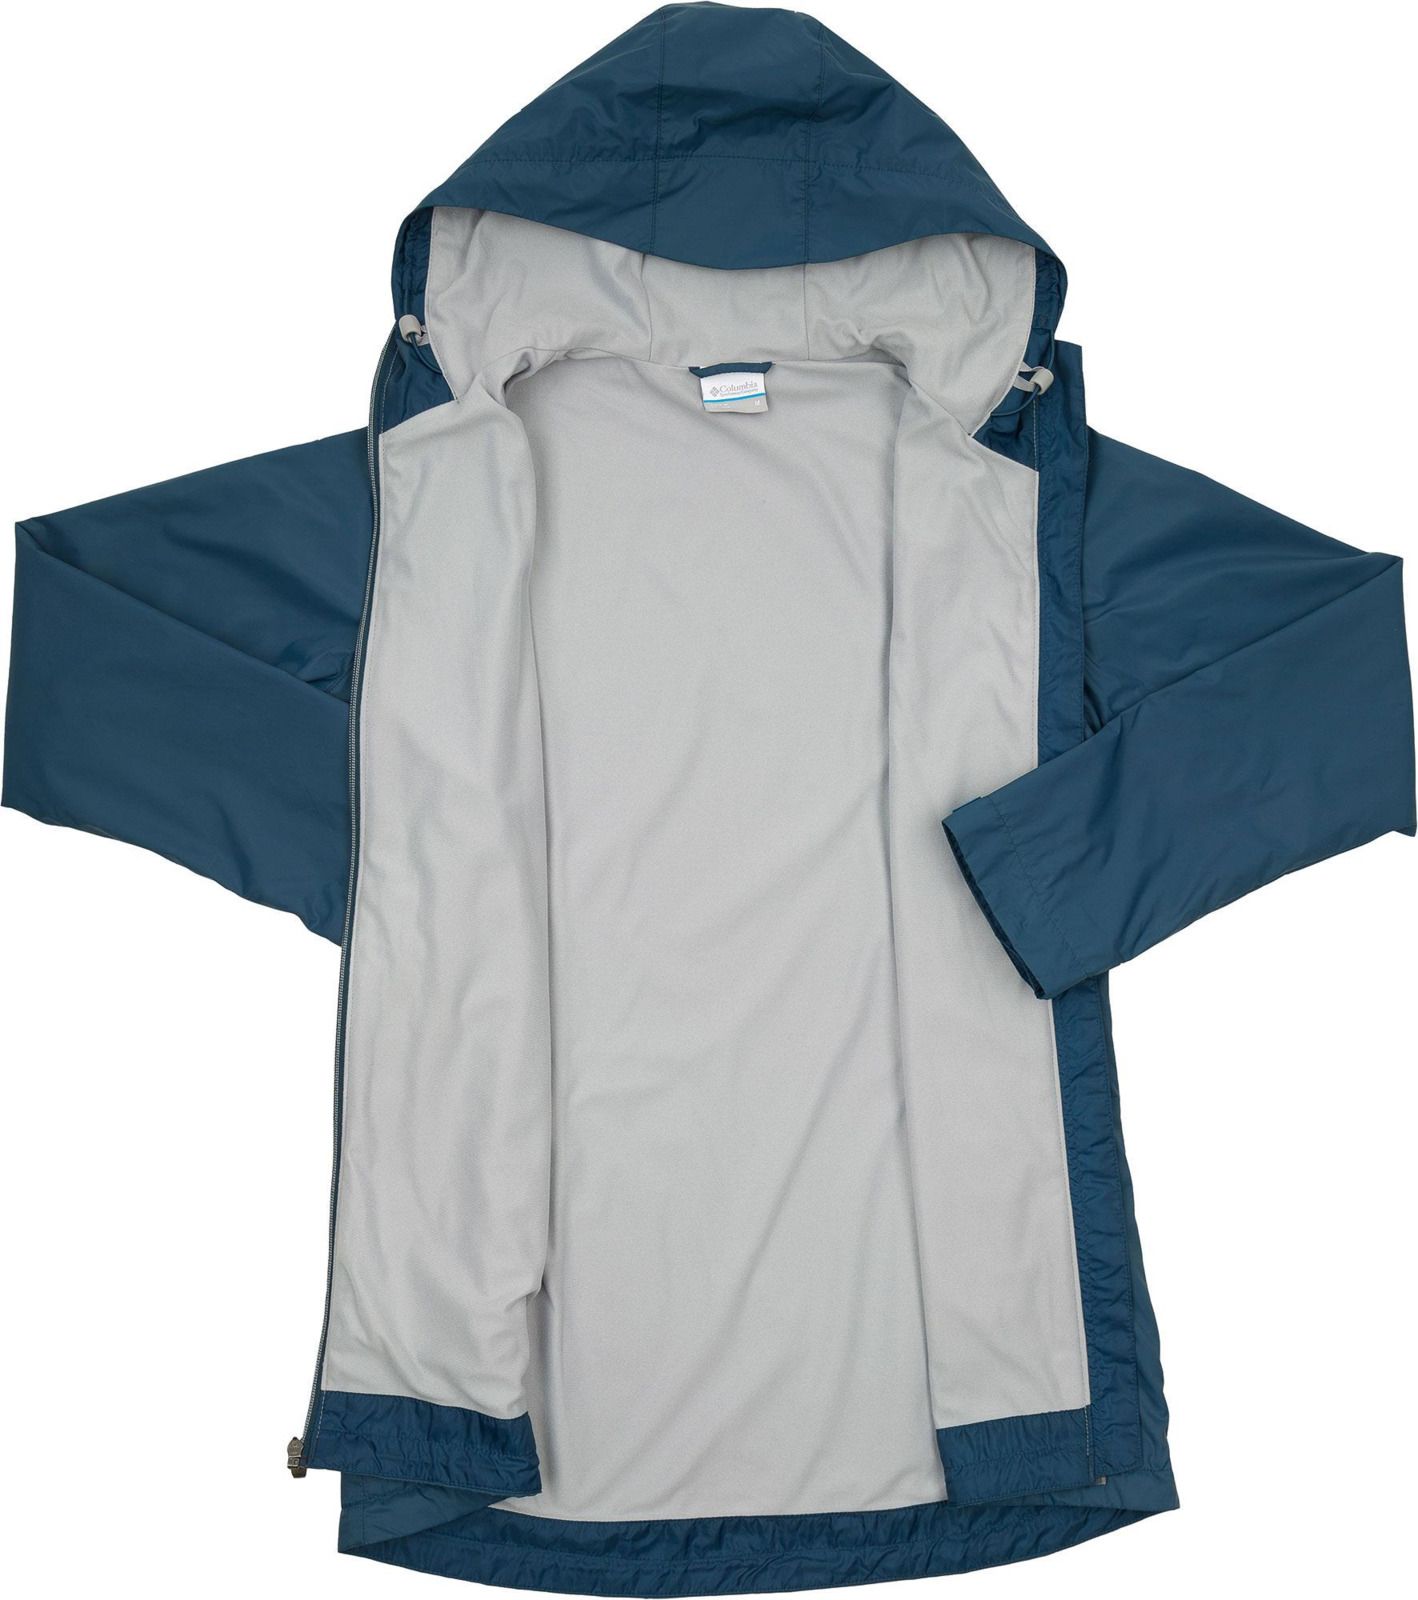   Columbia Switchback Lined Long Jacket, : . 1771941-403.  S (44)